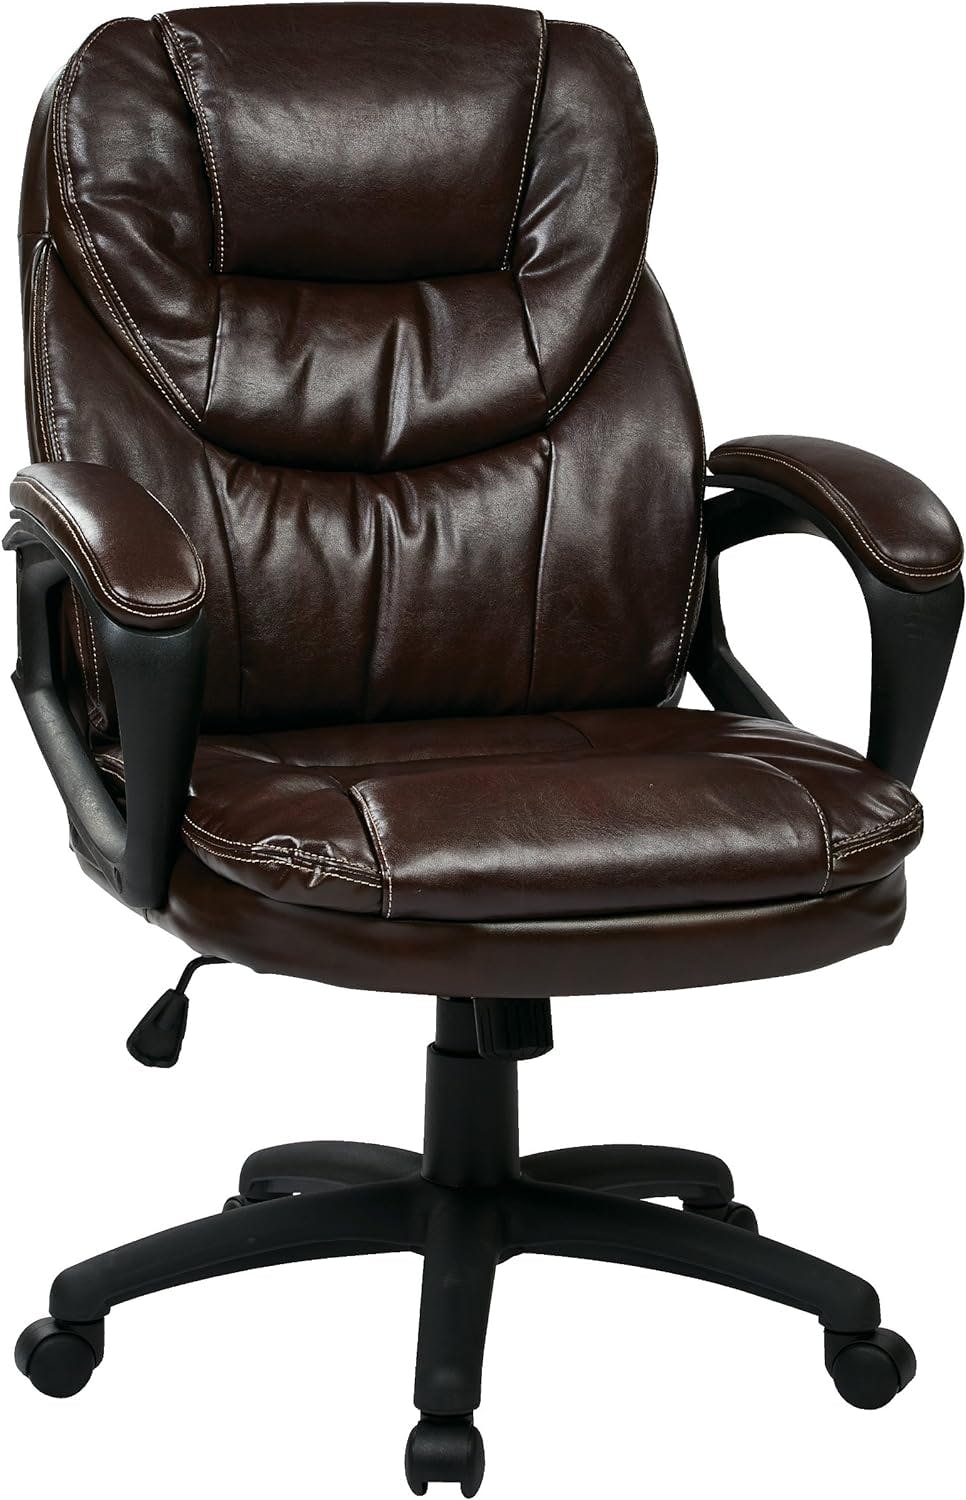 Executive High-Back Swivel Black Leather Office Chair with Lumbar Support